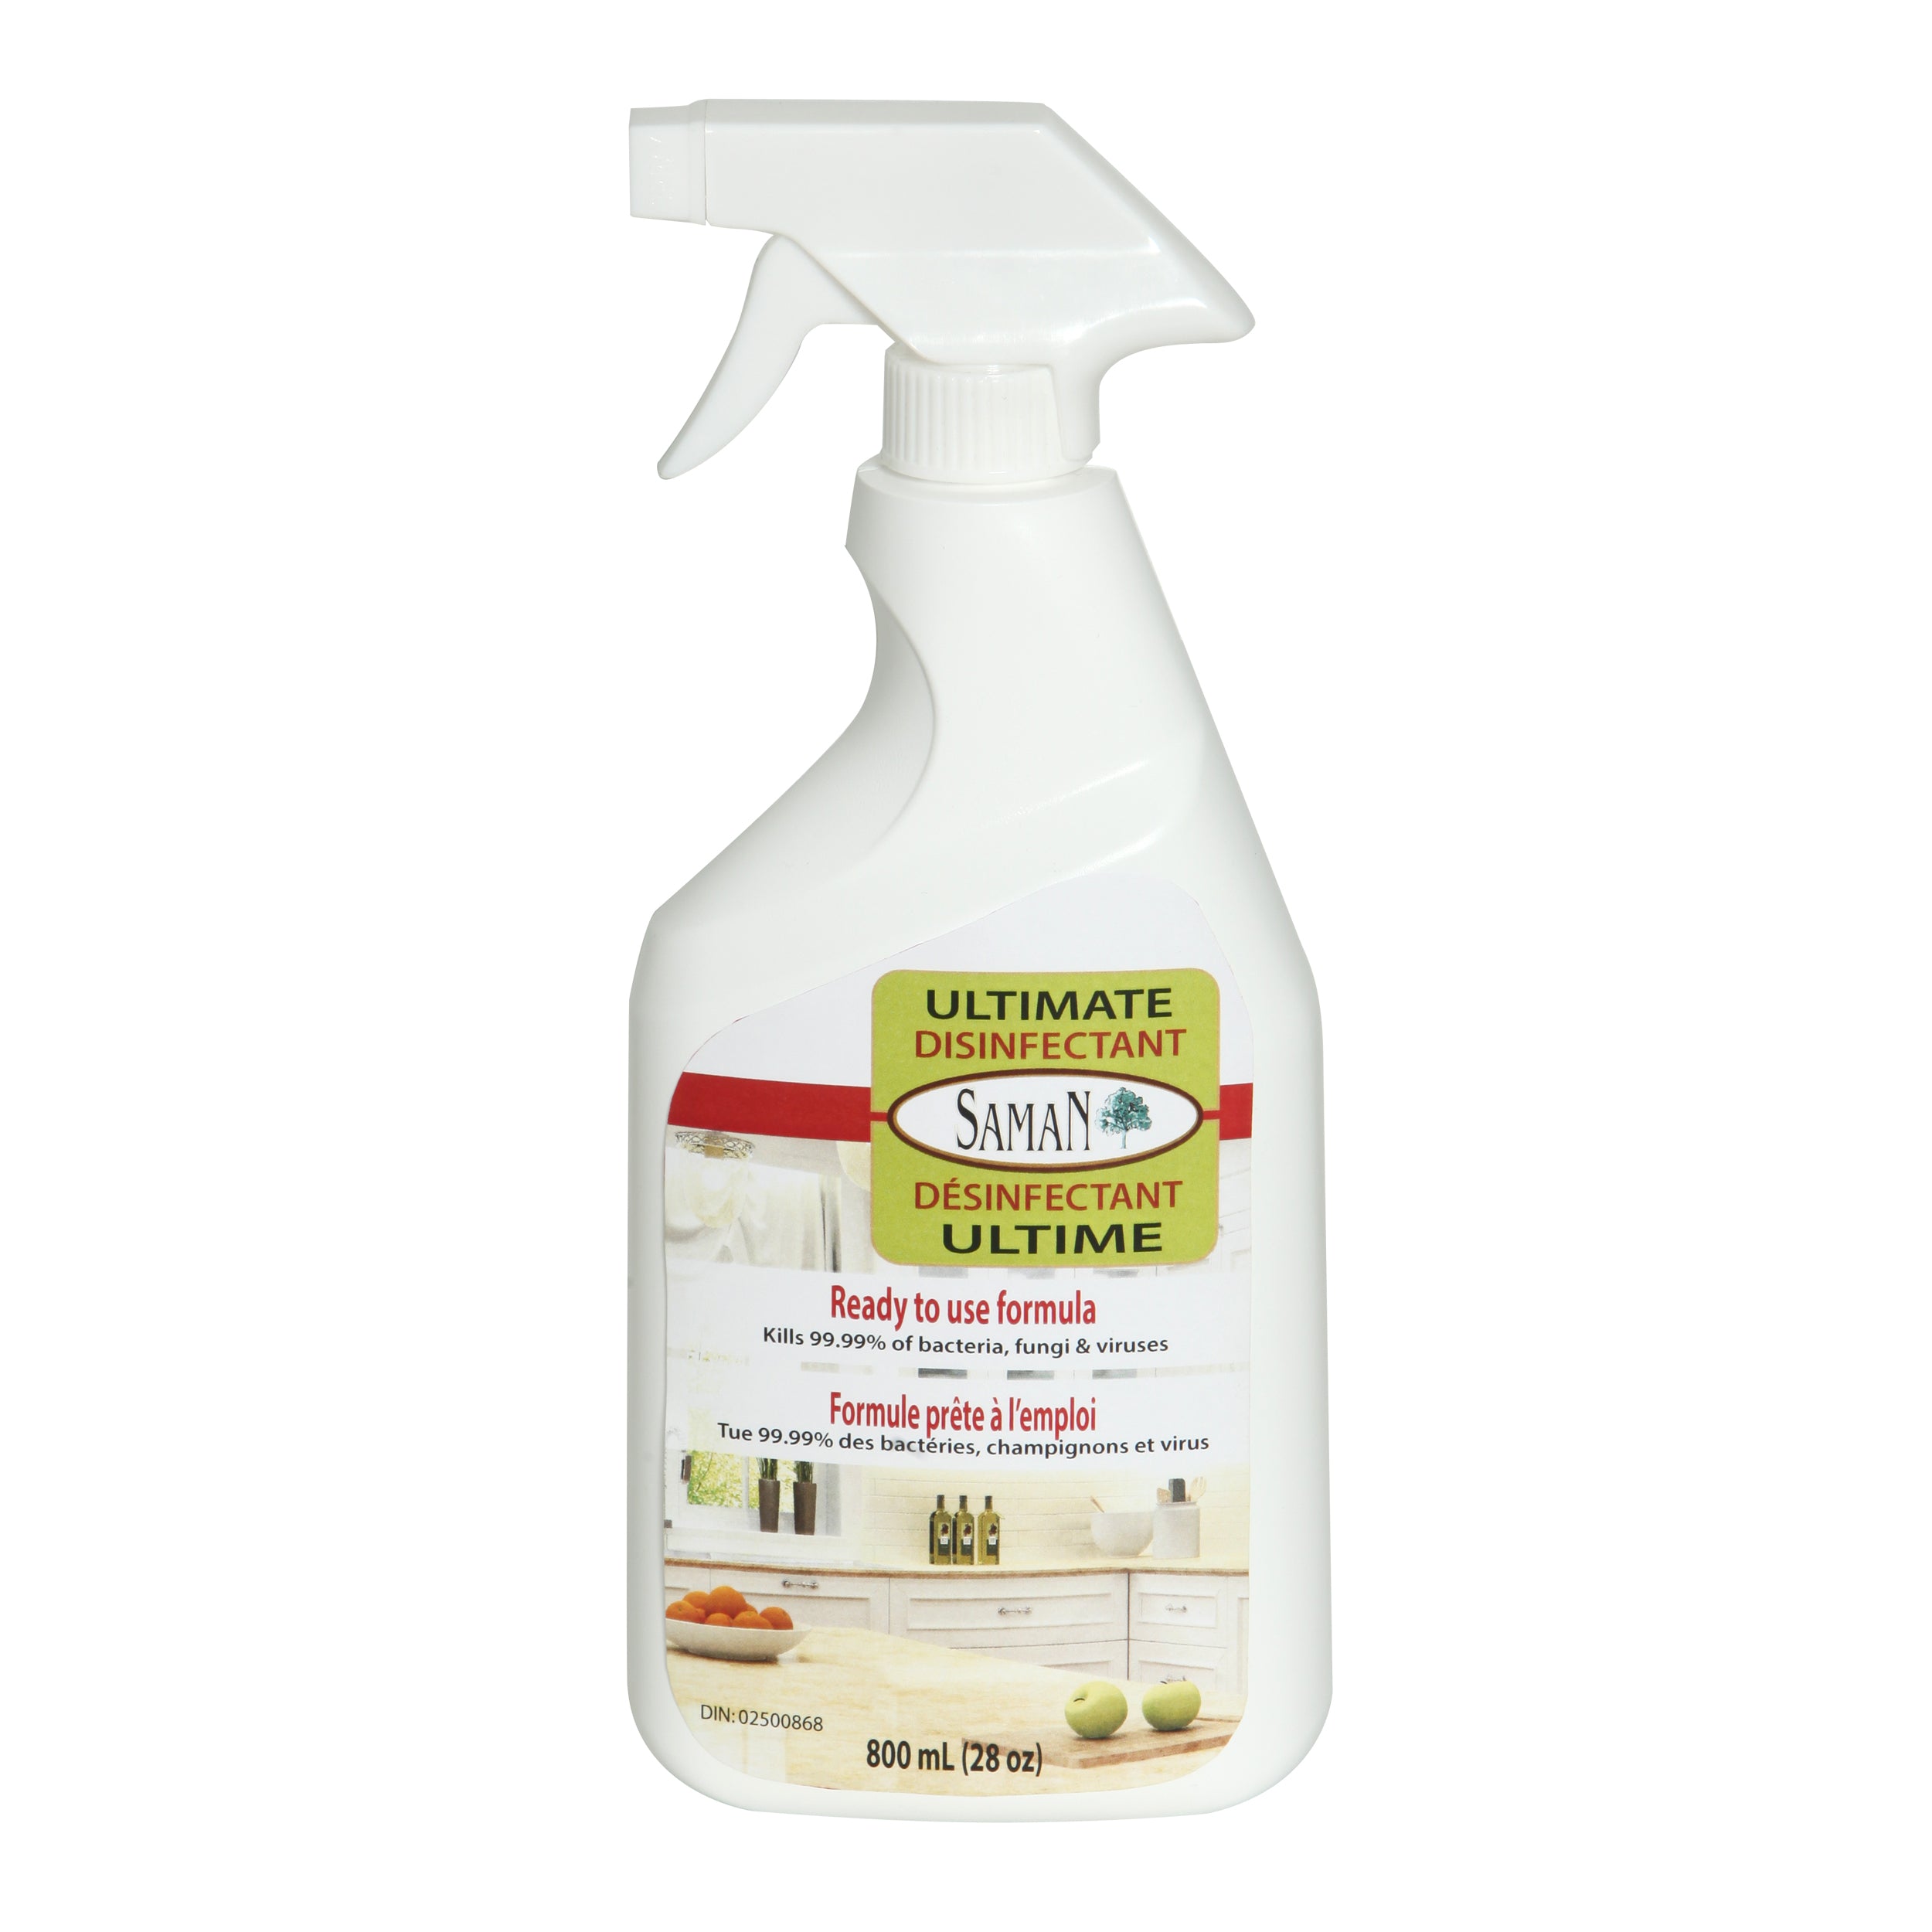 Ultimate all surfaces disinfectant